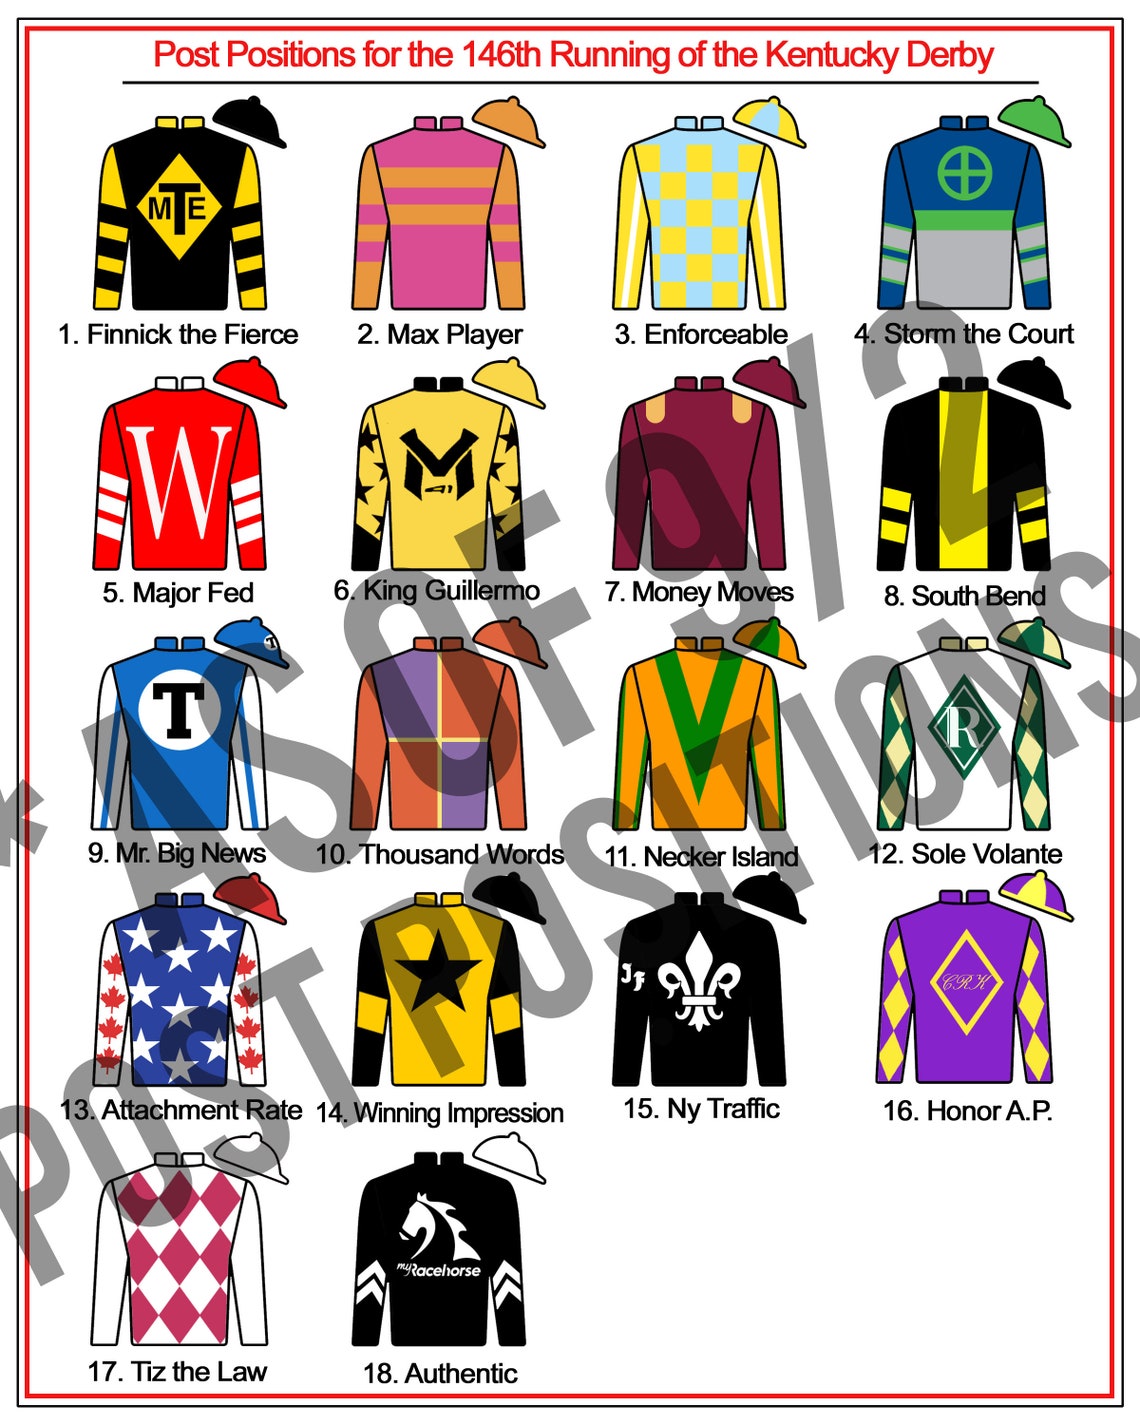 Kentucky Derby Party Post Positions and Jockey Jerseys Printable